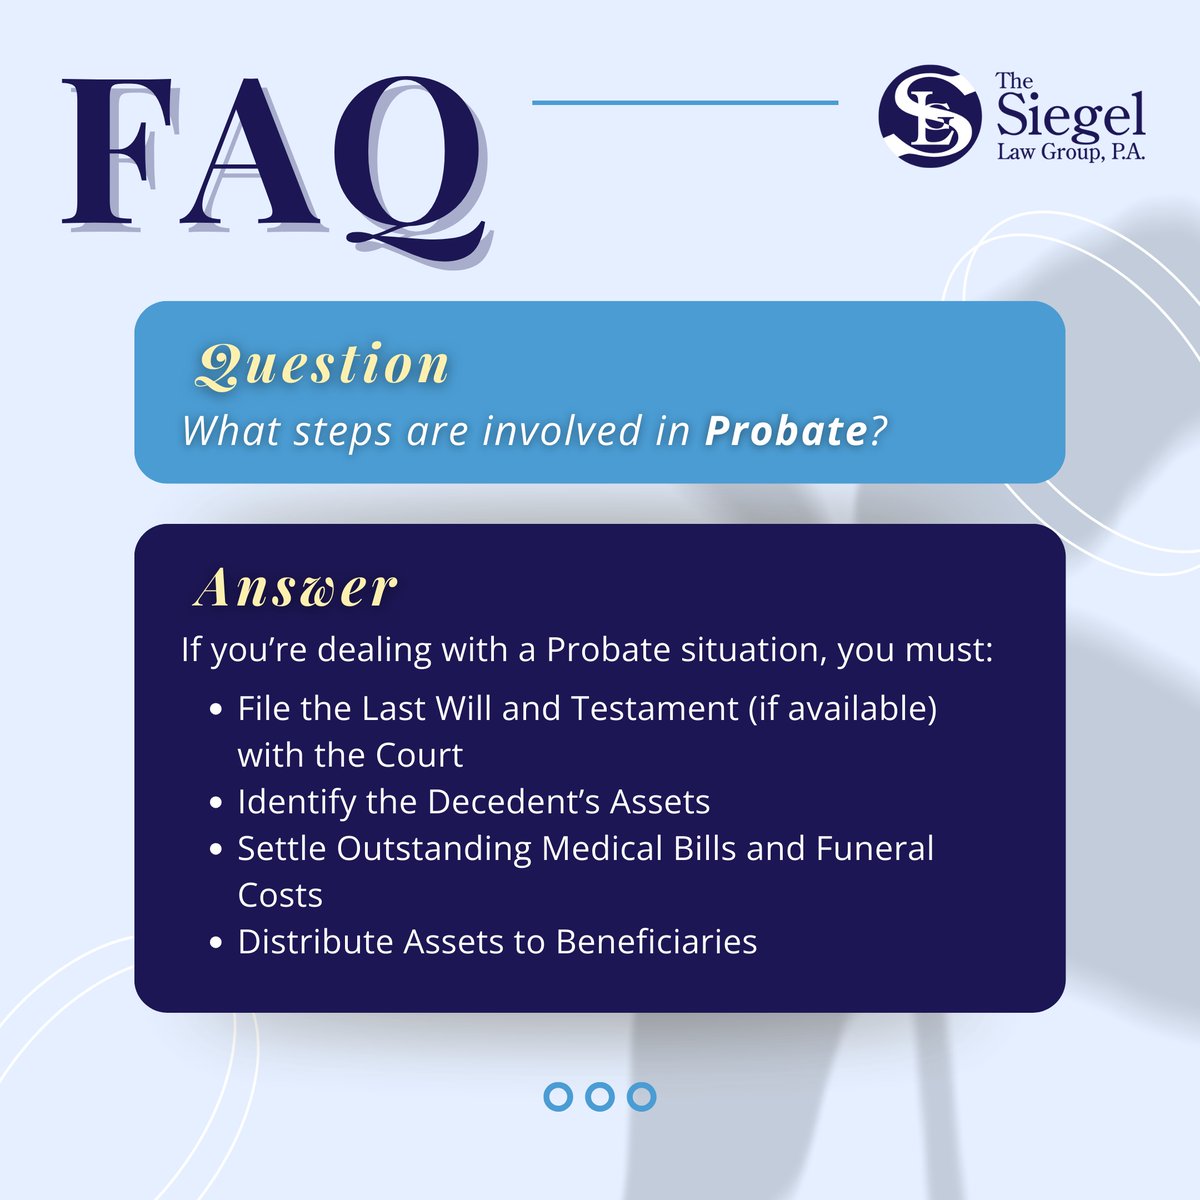 #FAQ: What steps are involved in Probate?
.
.
.

We are here serving you 24/7

📱 561-867-8816
💻siegellawgroup.com  

#EstatePlanning #FloridaEstatePlanning #TheSiegelLawGroup